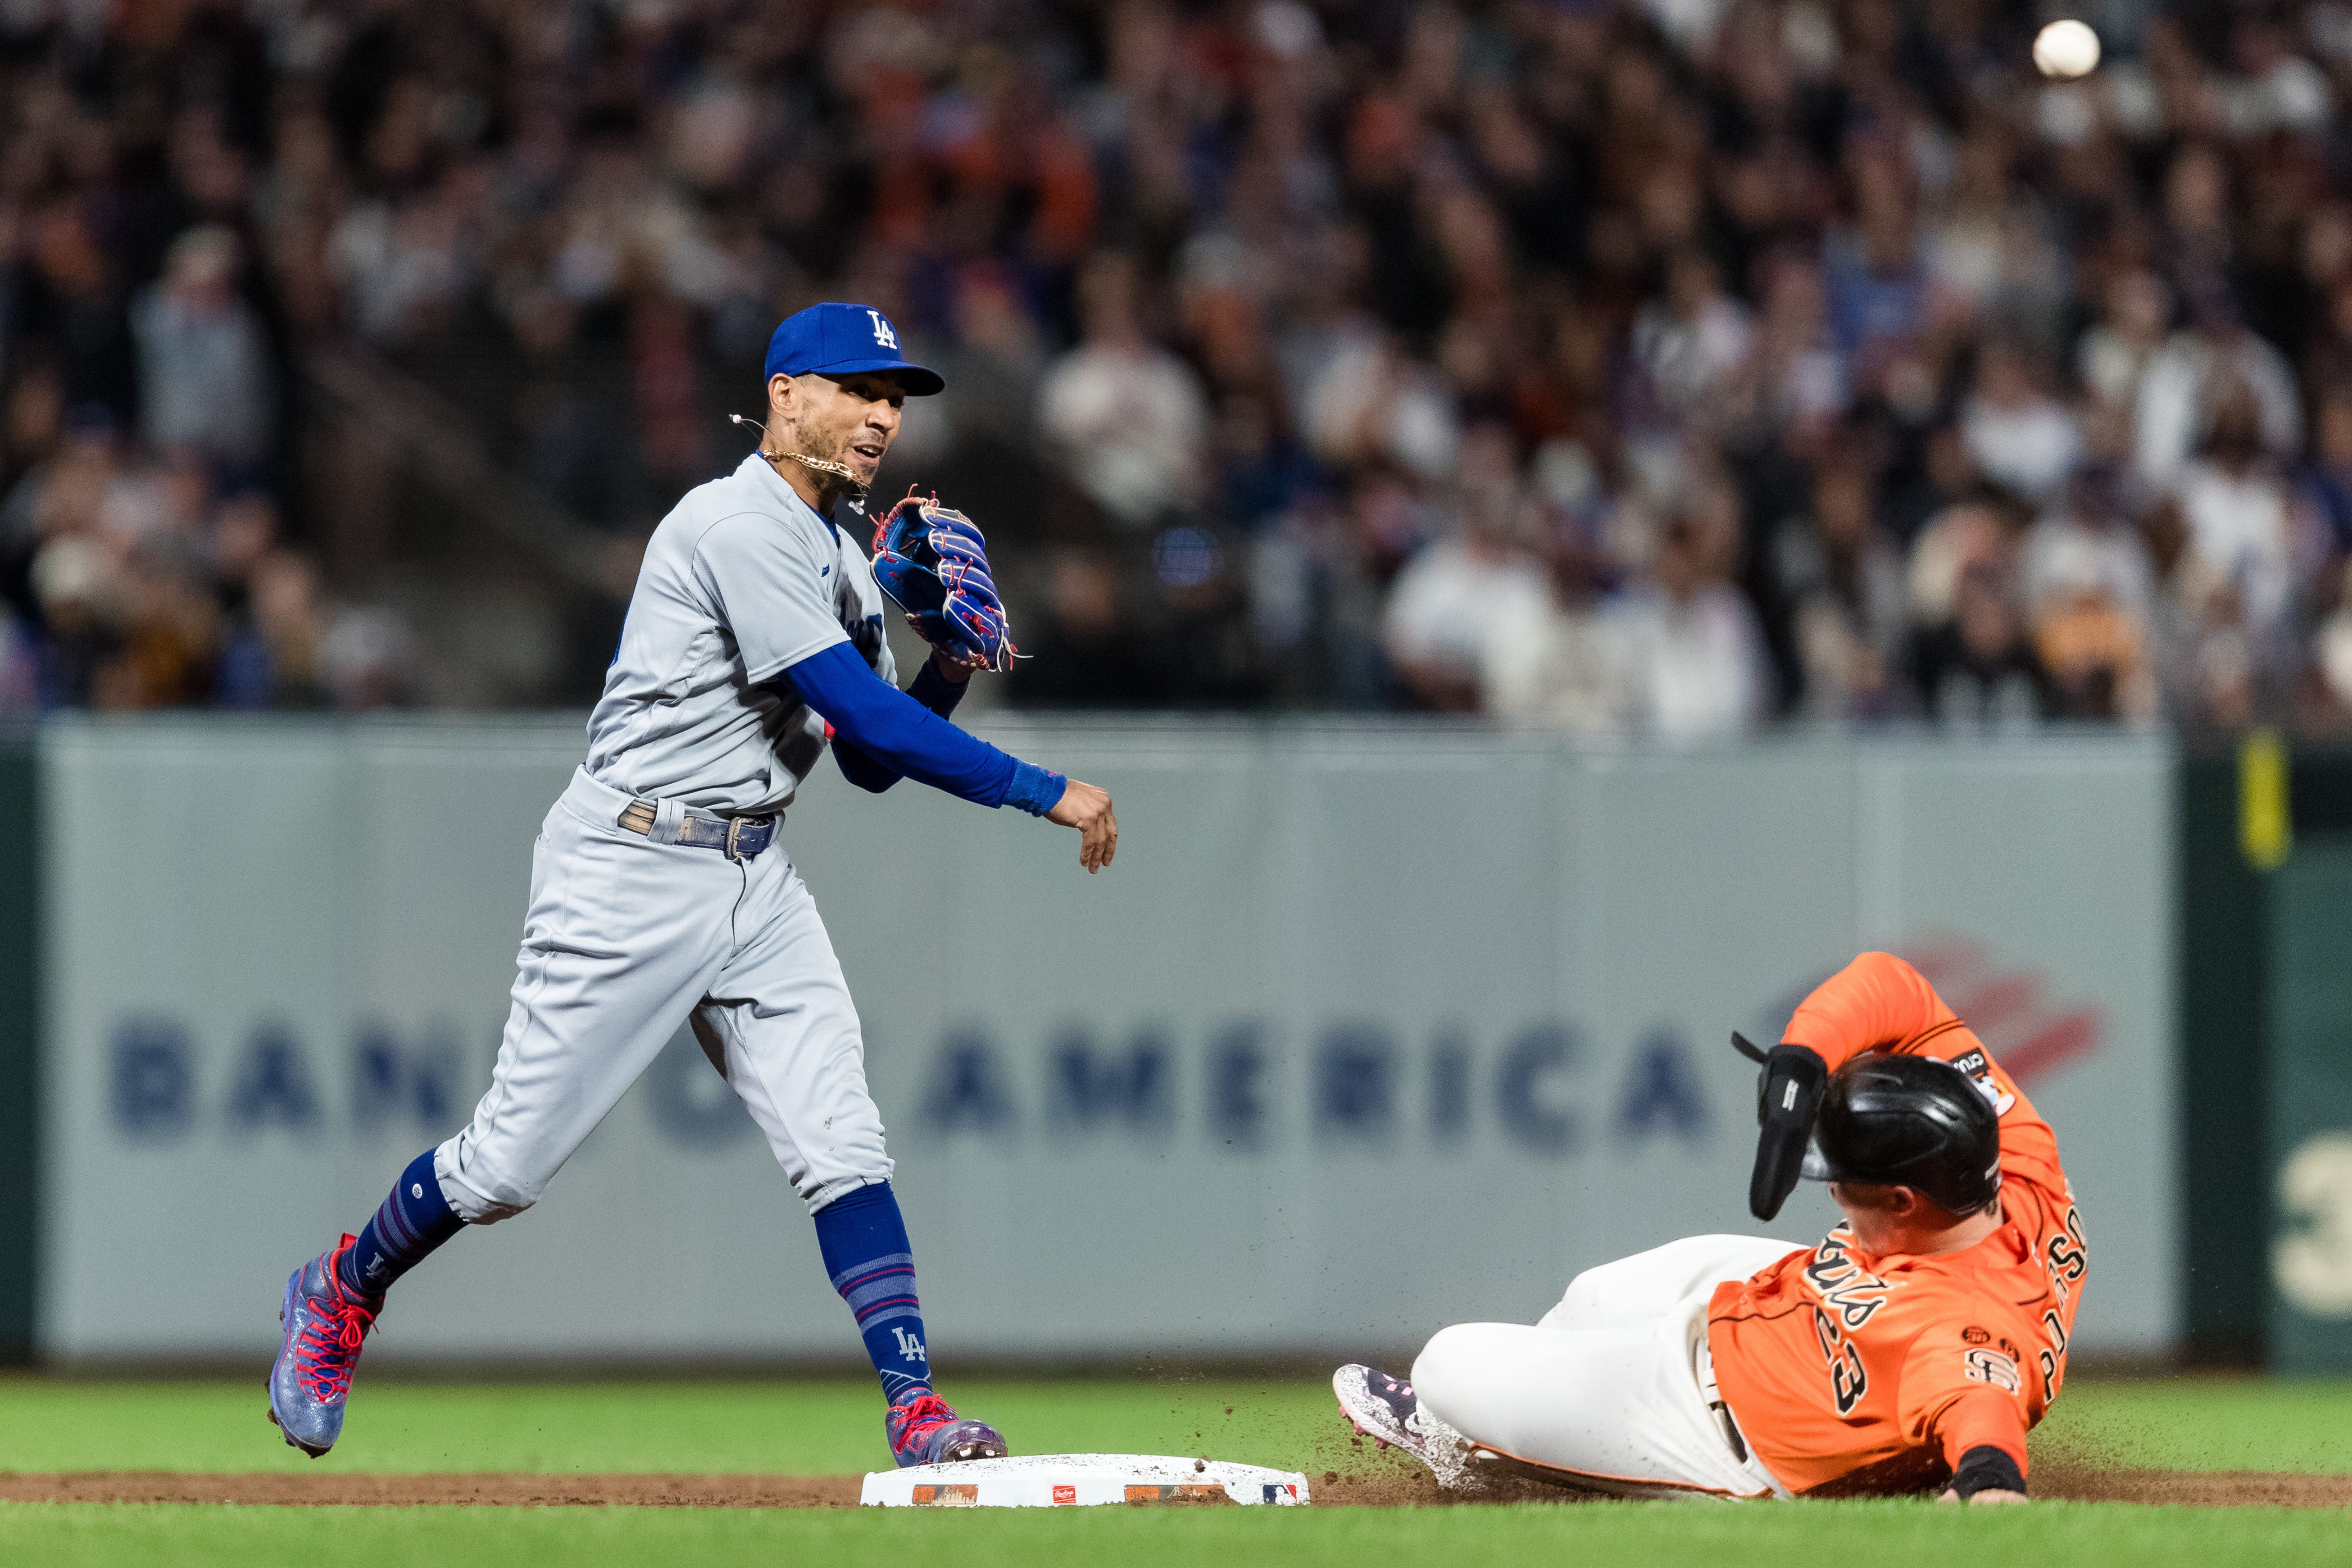 Dodgers spoil debut of interim Giants manager